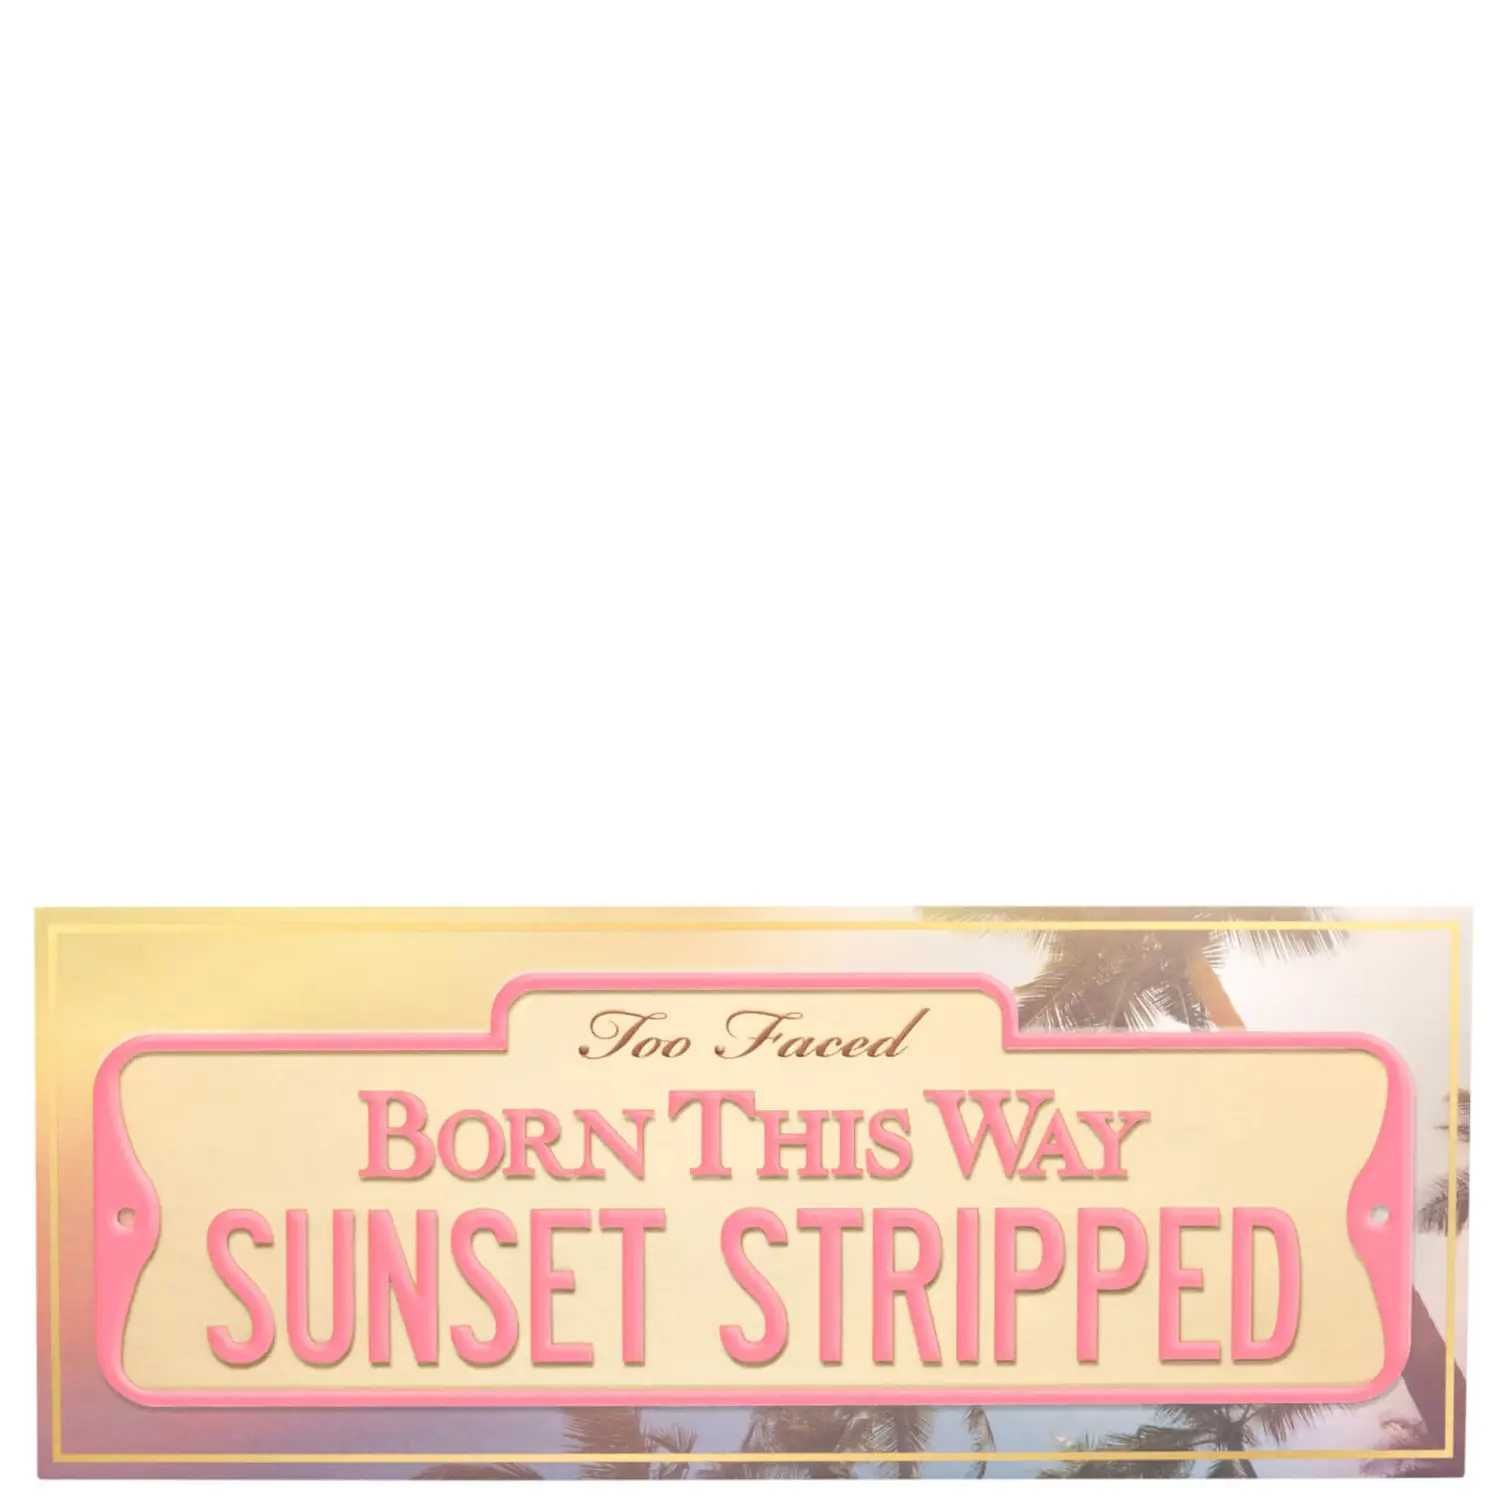 Too Faced Born this Way Sunset stripped